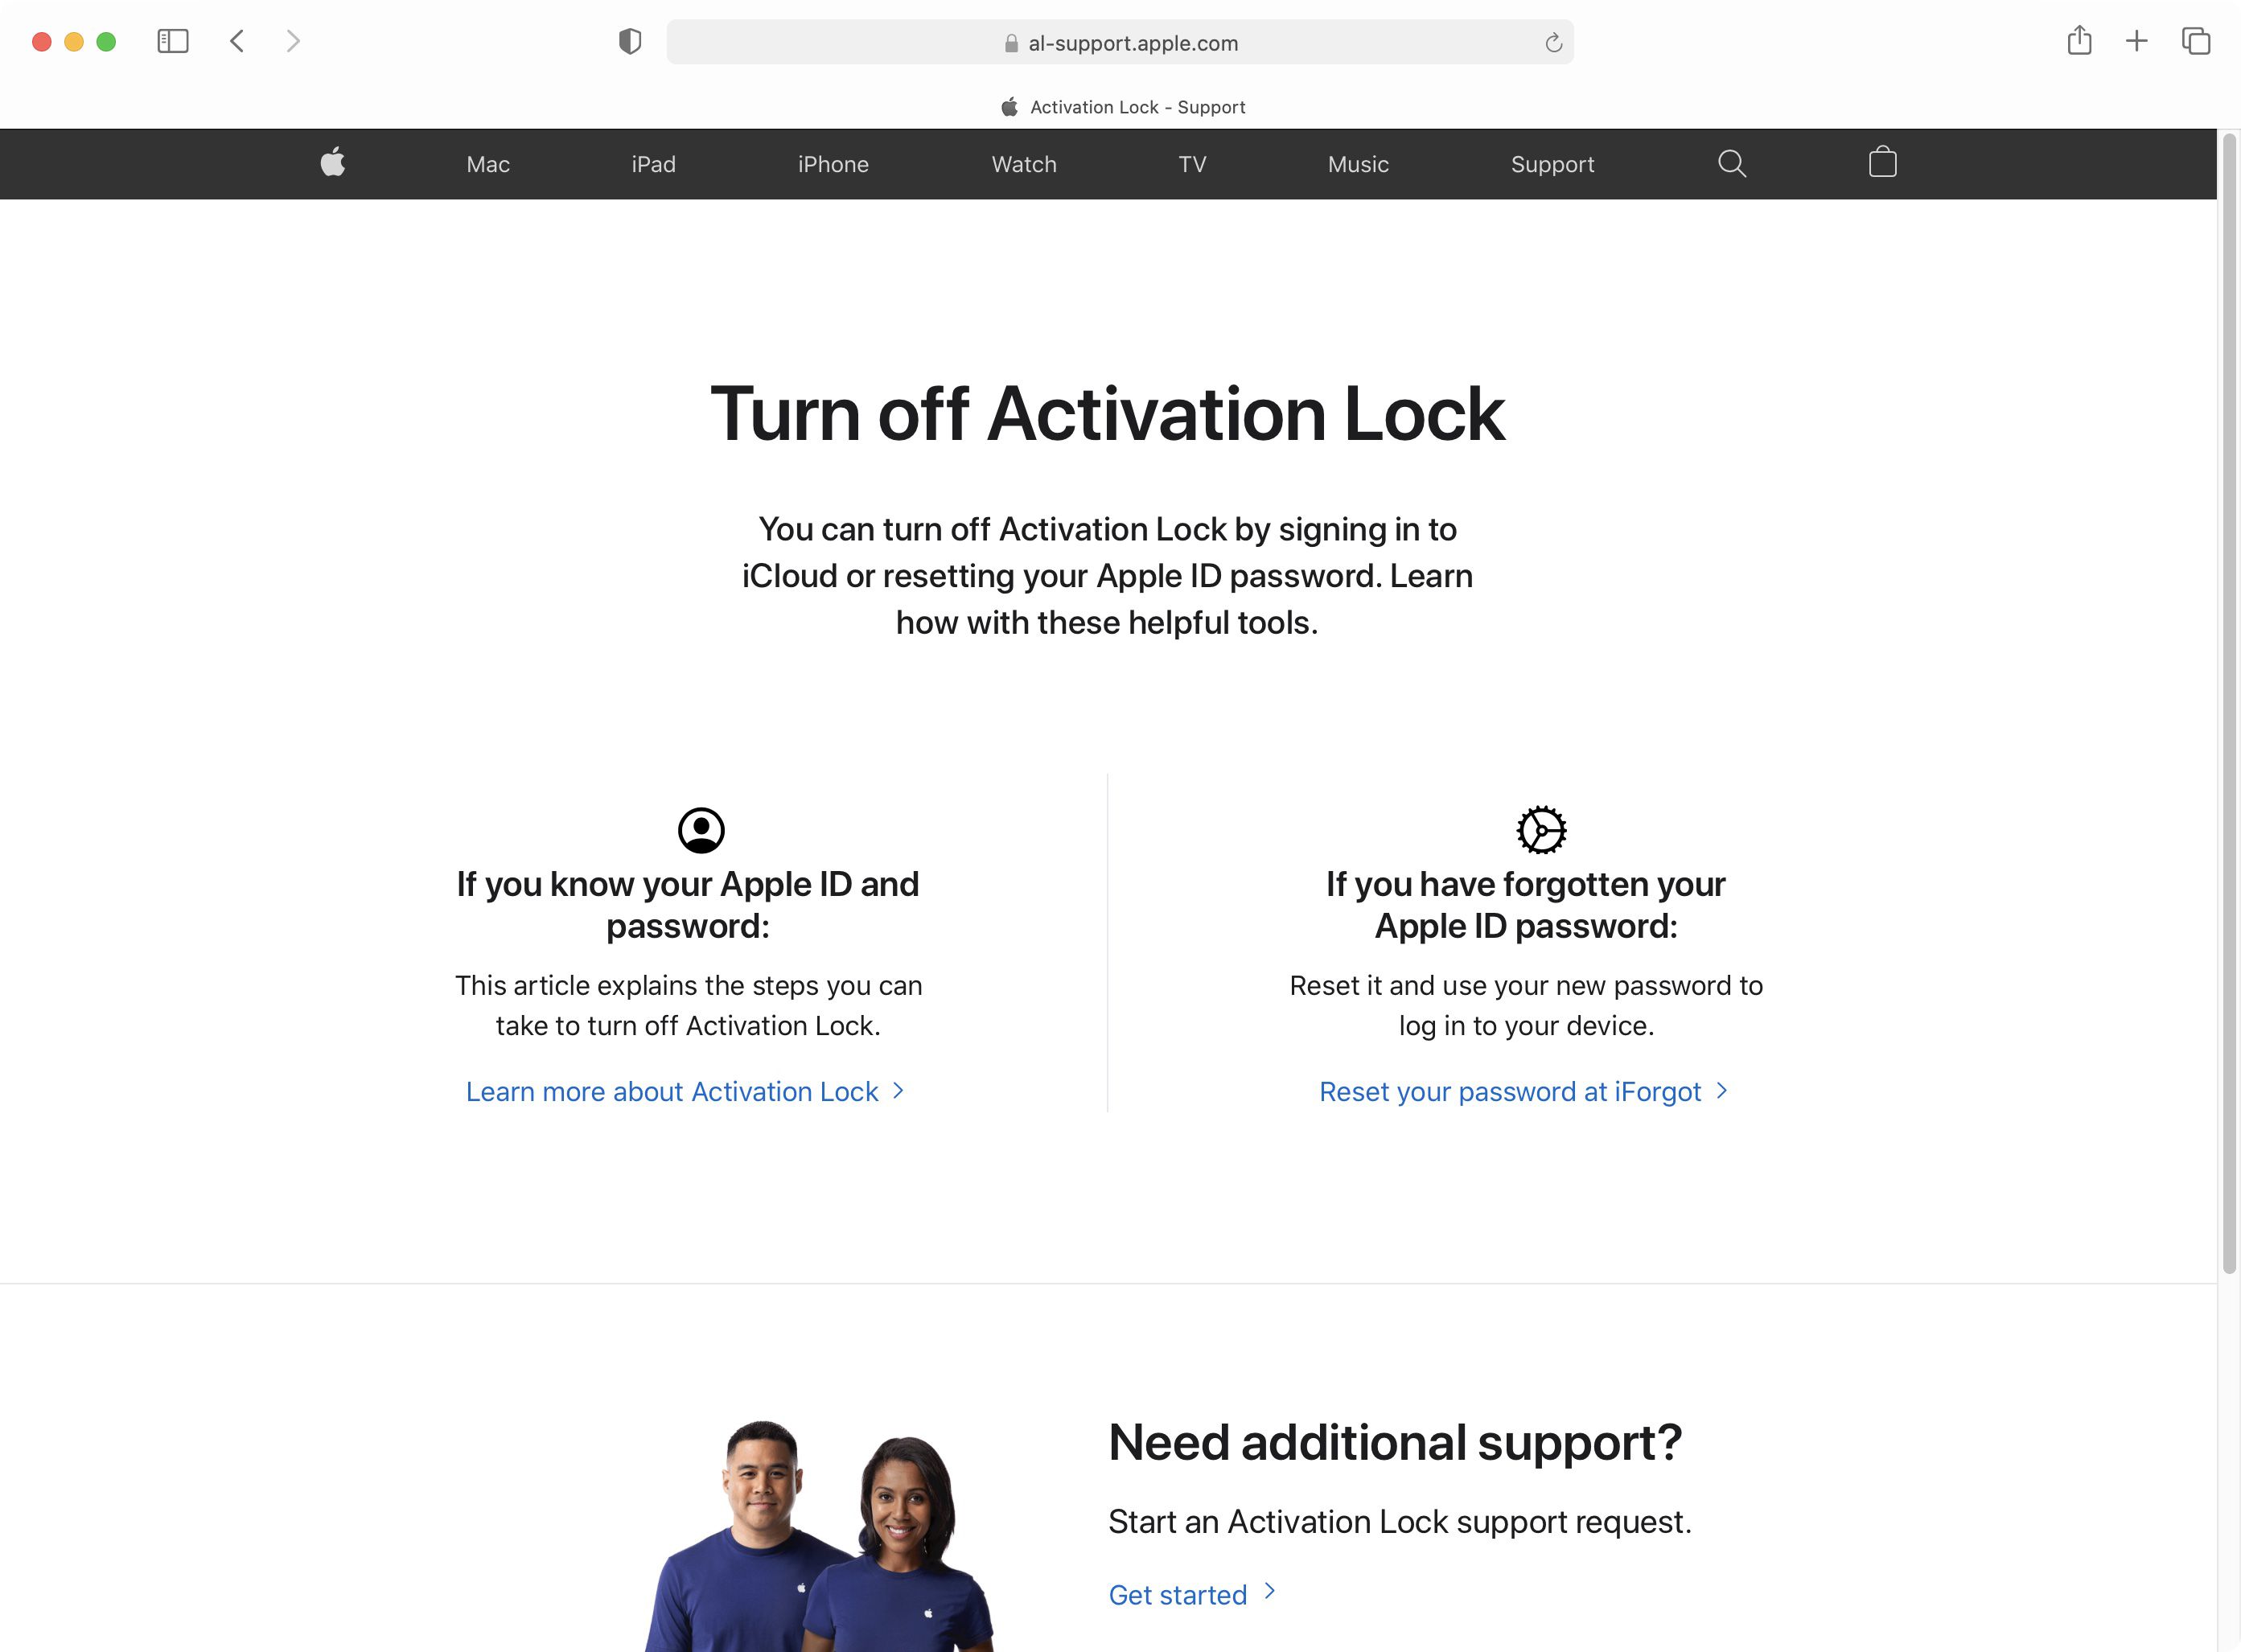 Apple launches self-service portal to initiate activation lock removal requests